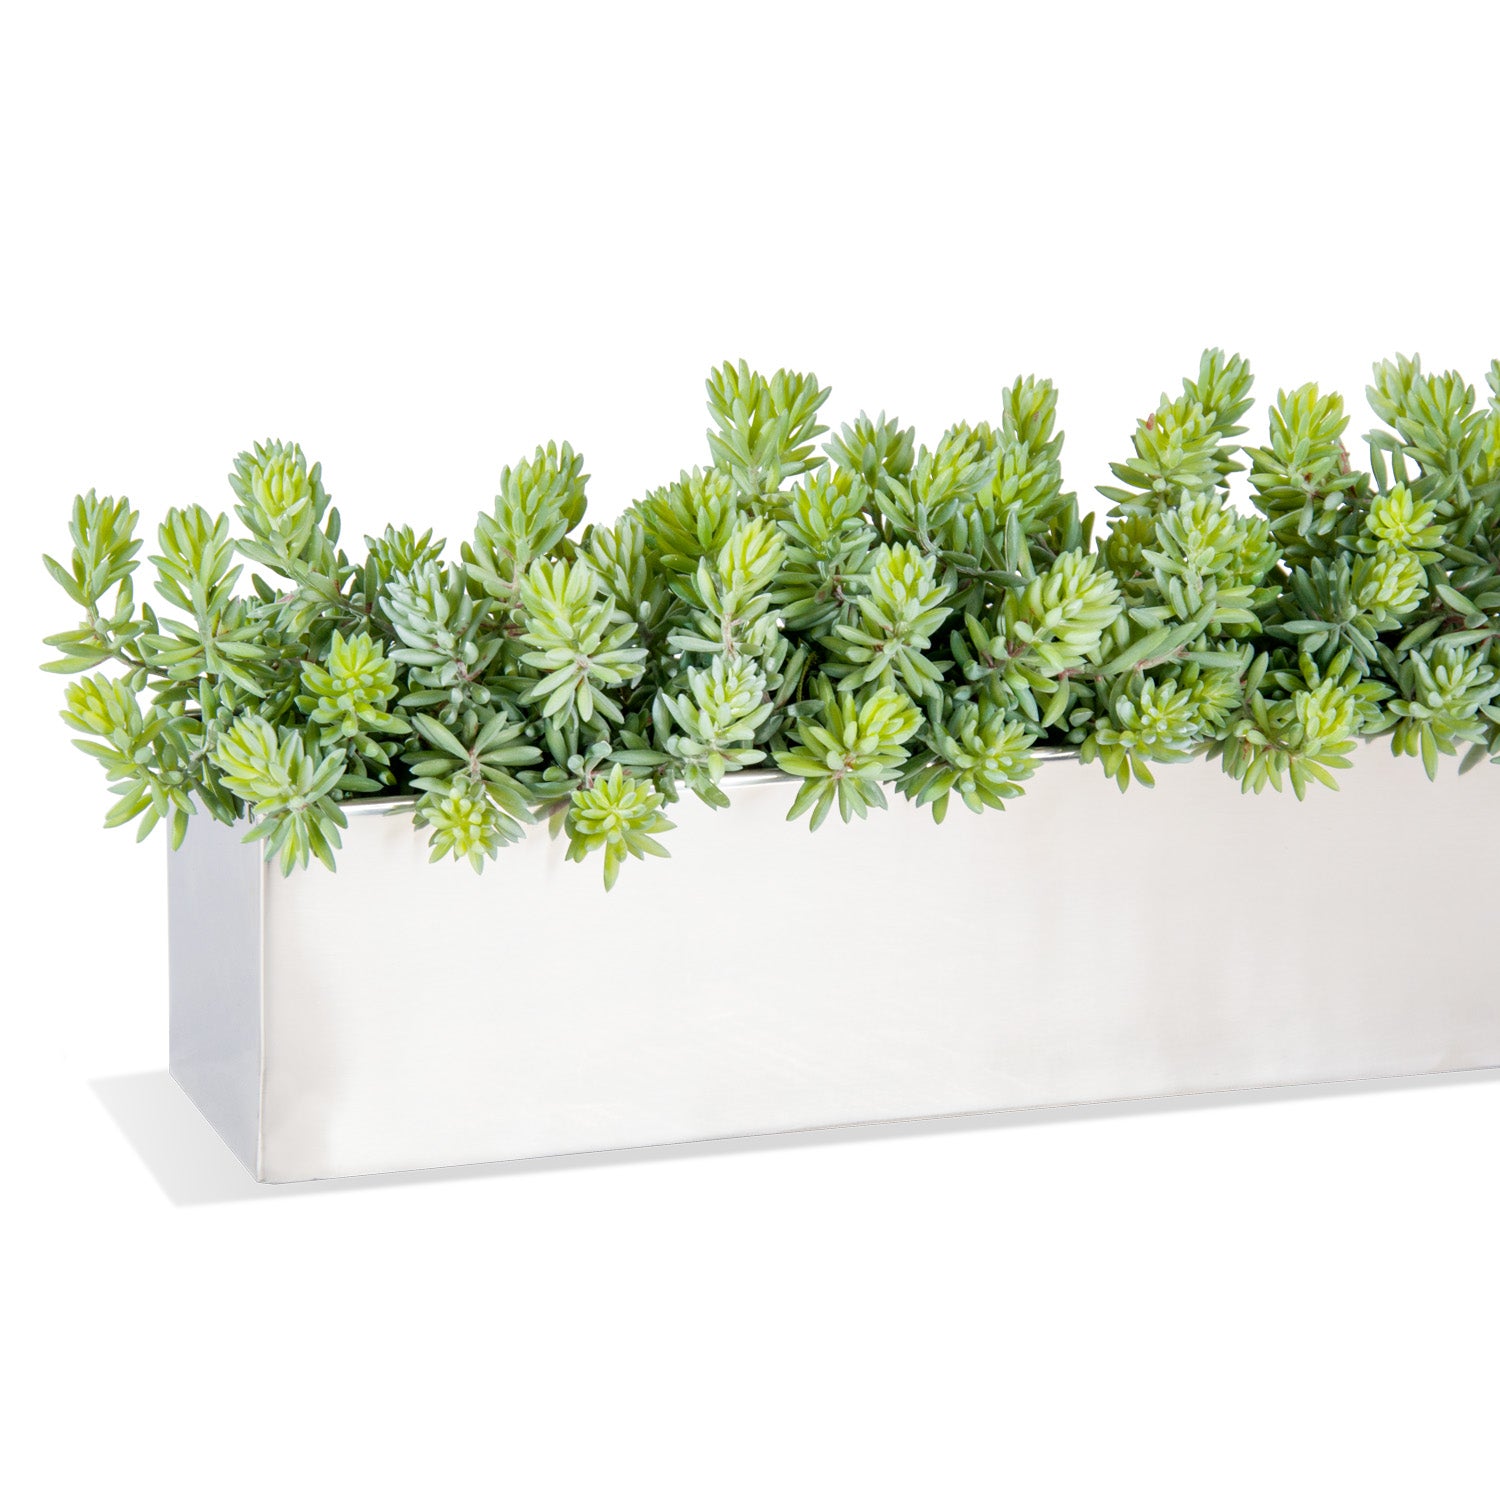 Sedum Green in Polished Stainless Linear Vase